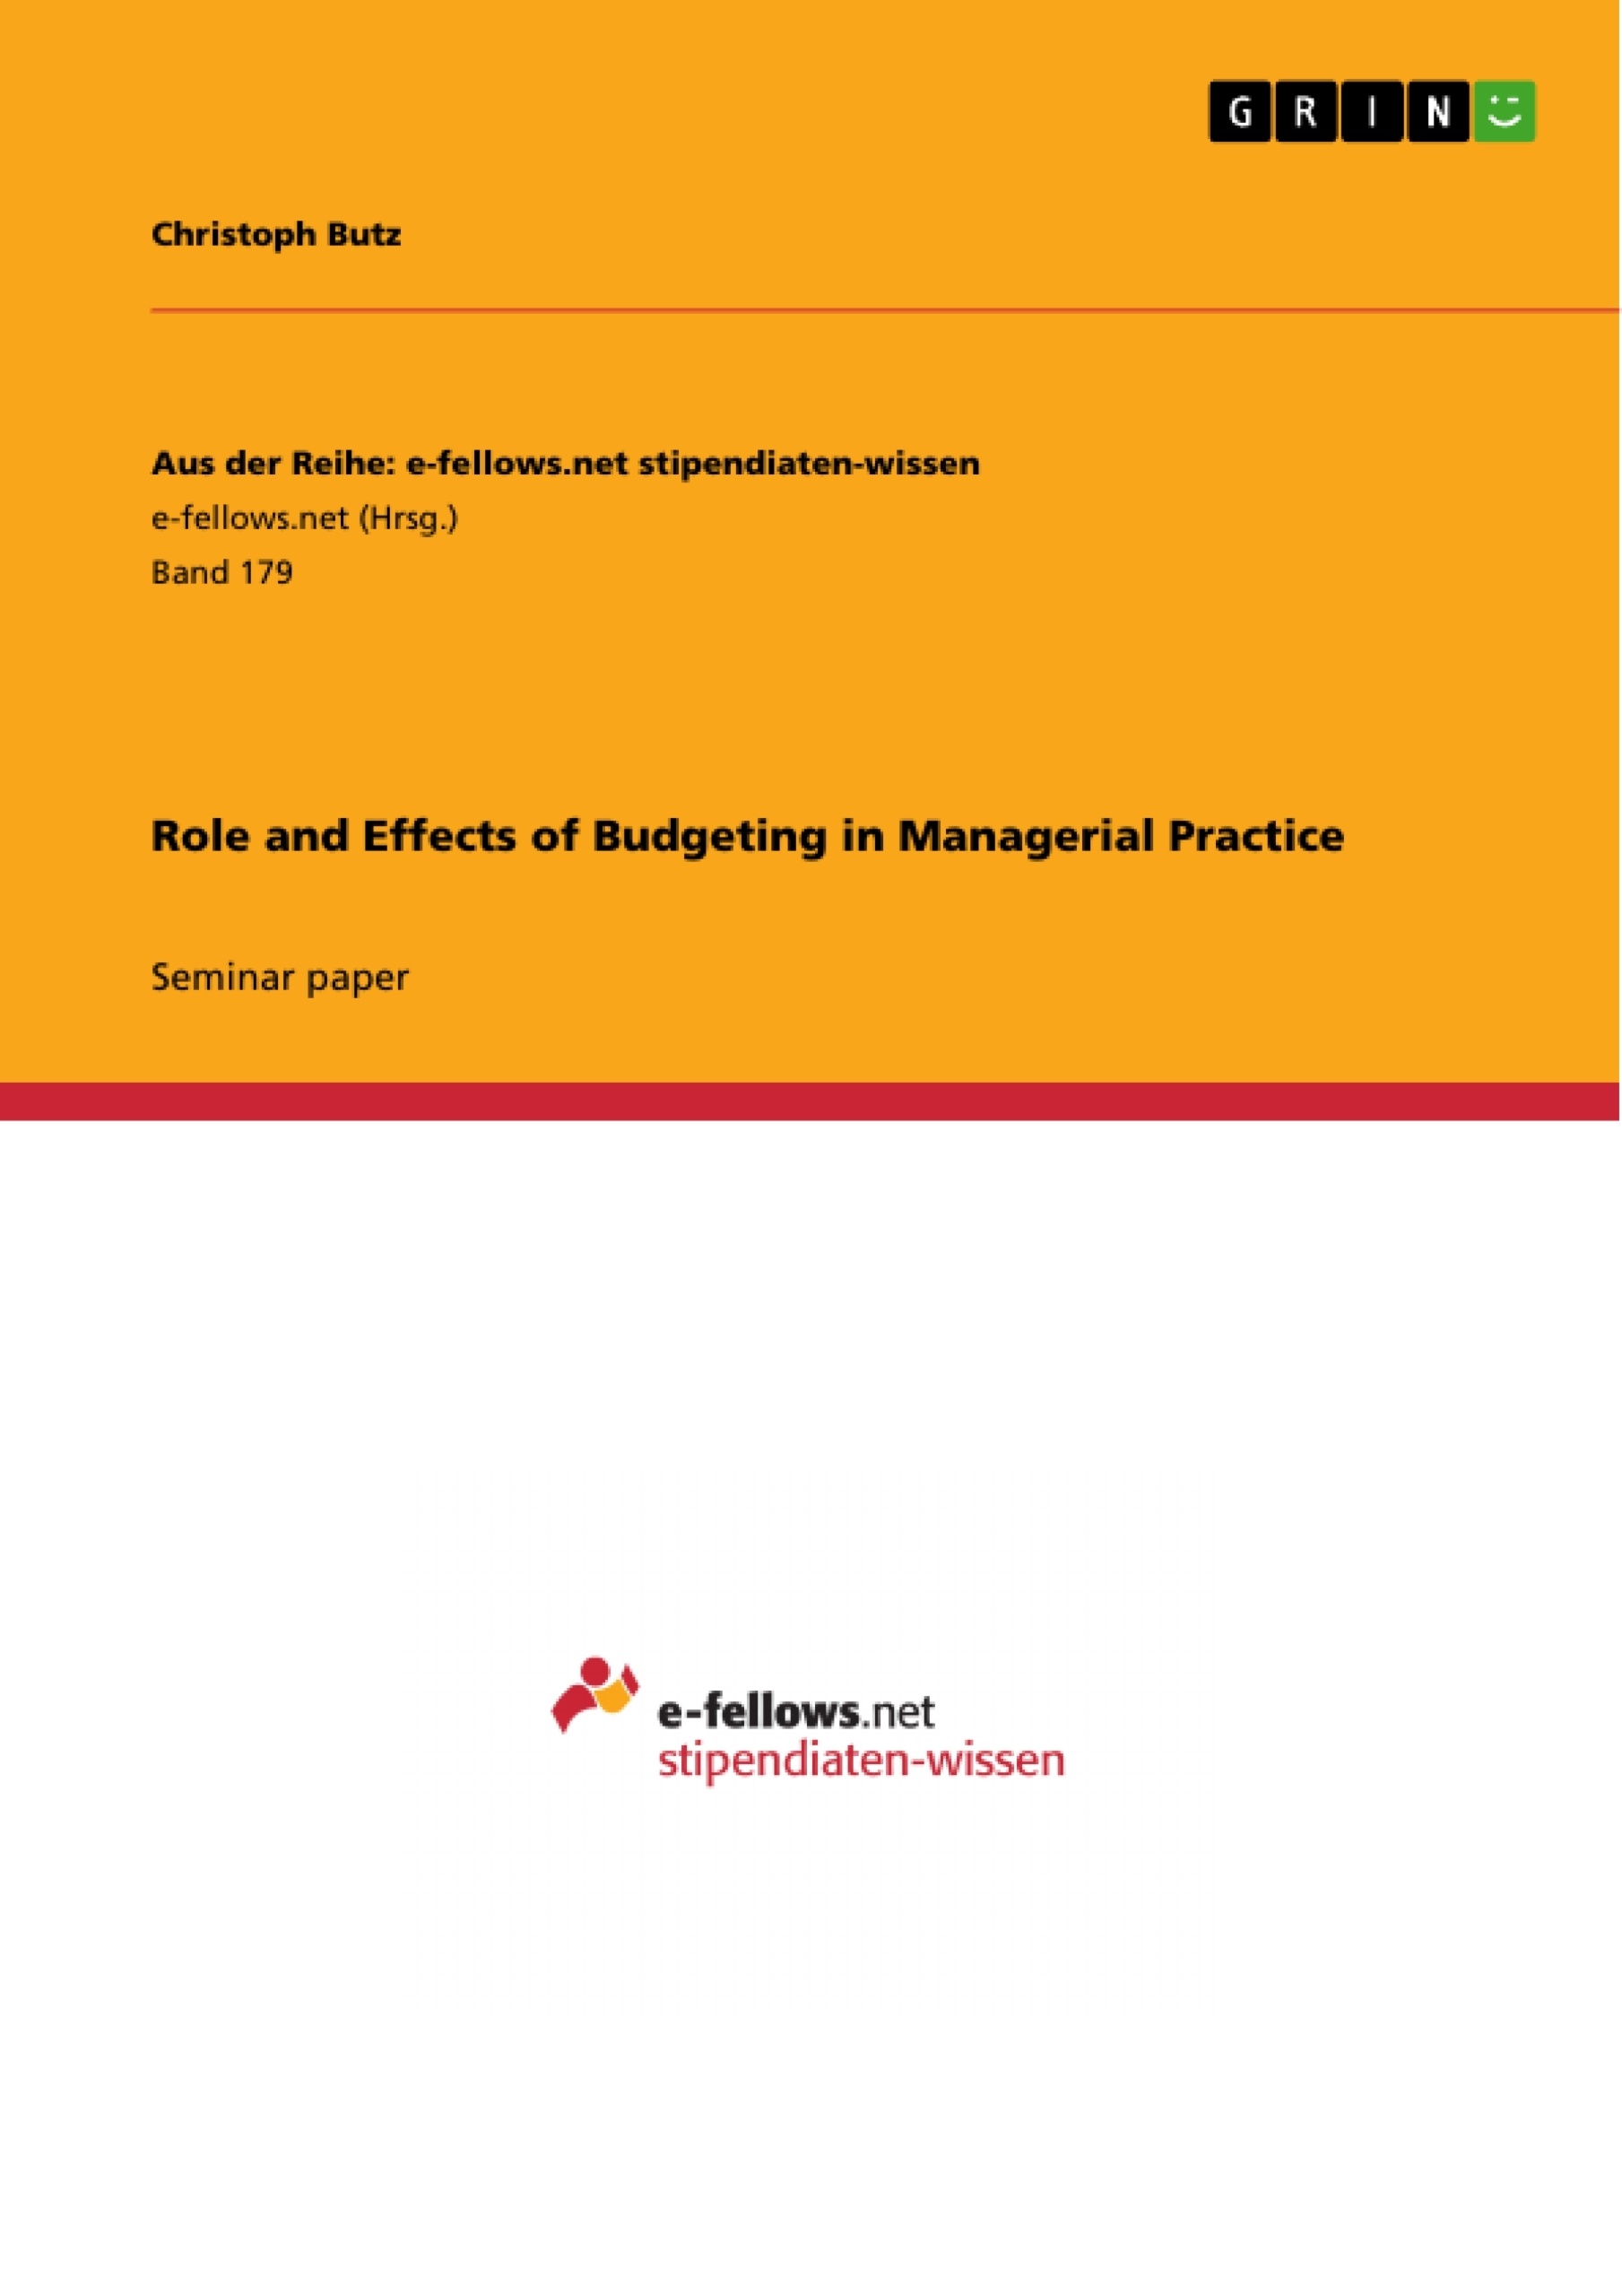 Title: Role and Effects of Budgeting in Managerial Practice